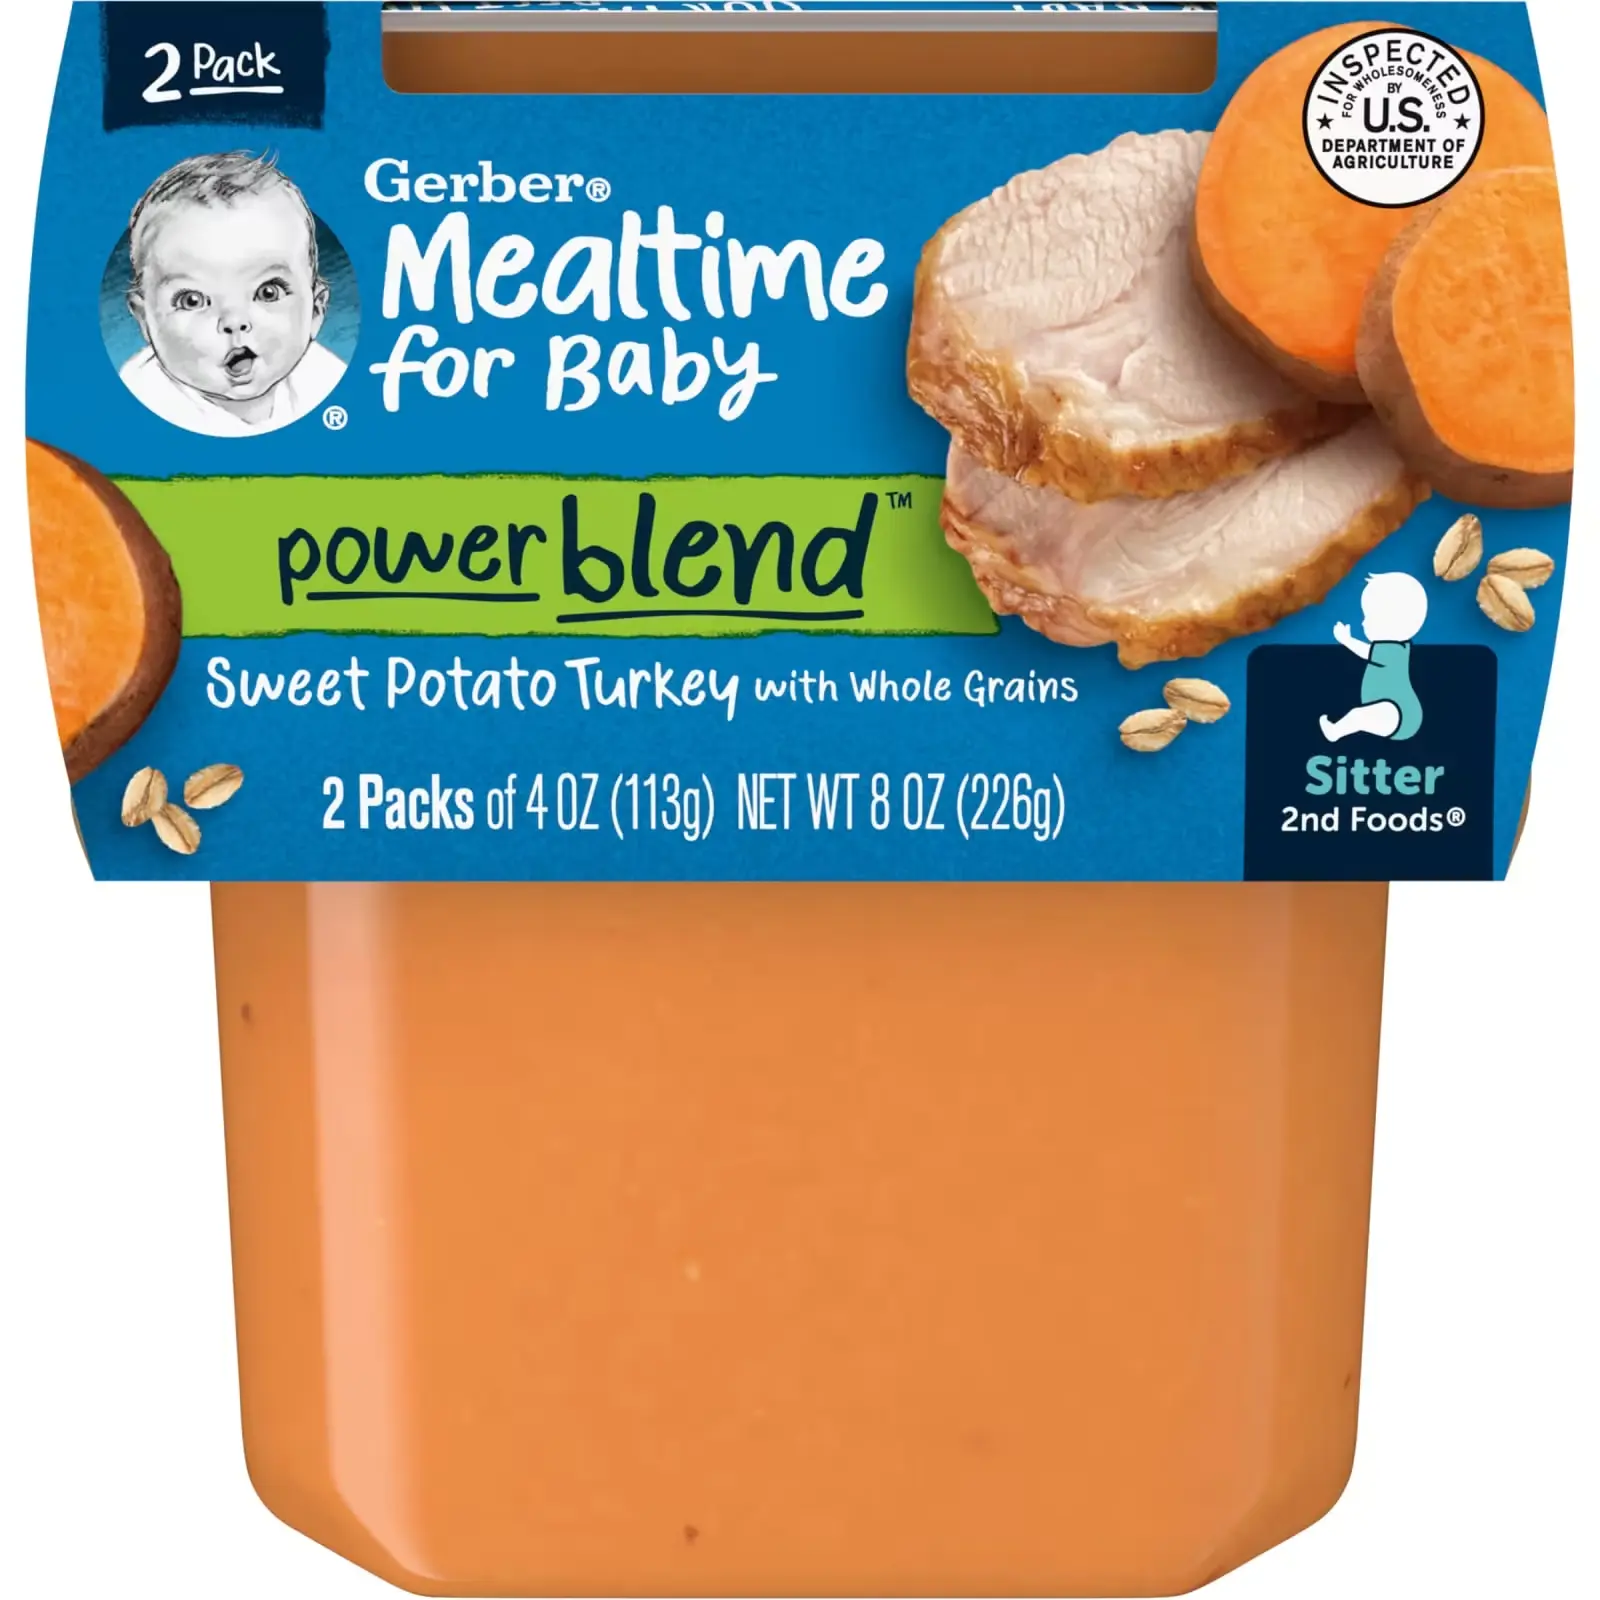 Пюре Gerber Mealtime for Baby, Power Blend, 2nd Foods, Sweet Potato, Turkey with Whole Grains, 2 банки по 113 г (GBR-07360)